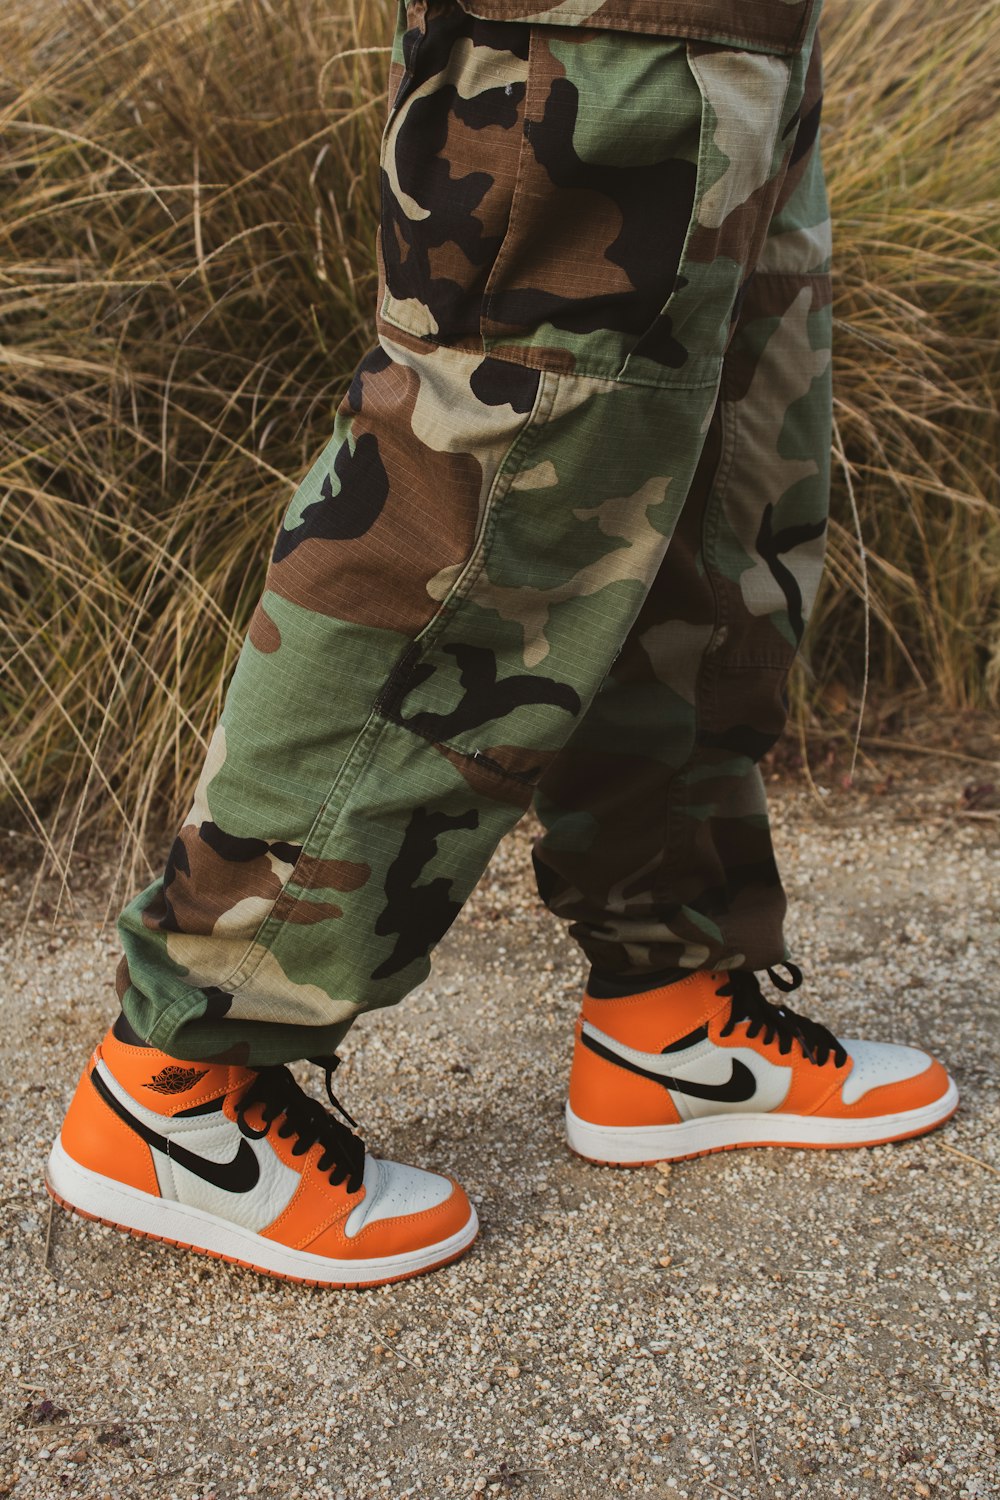 person in green brown and black camouflage pants and orange nike sneakers – Free Apparel Image on Unsplash